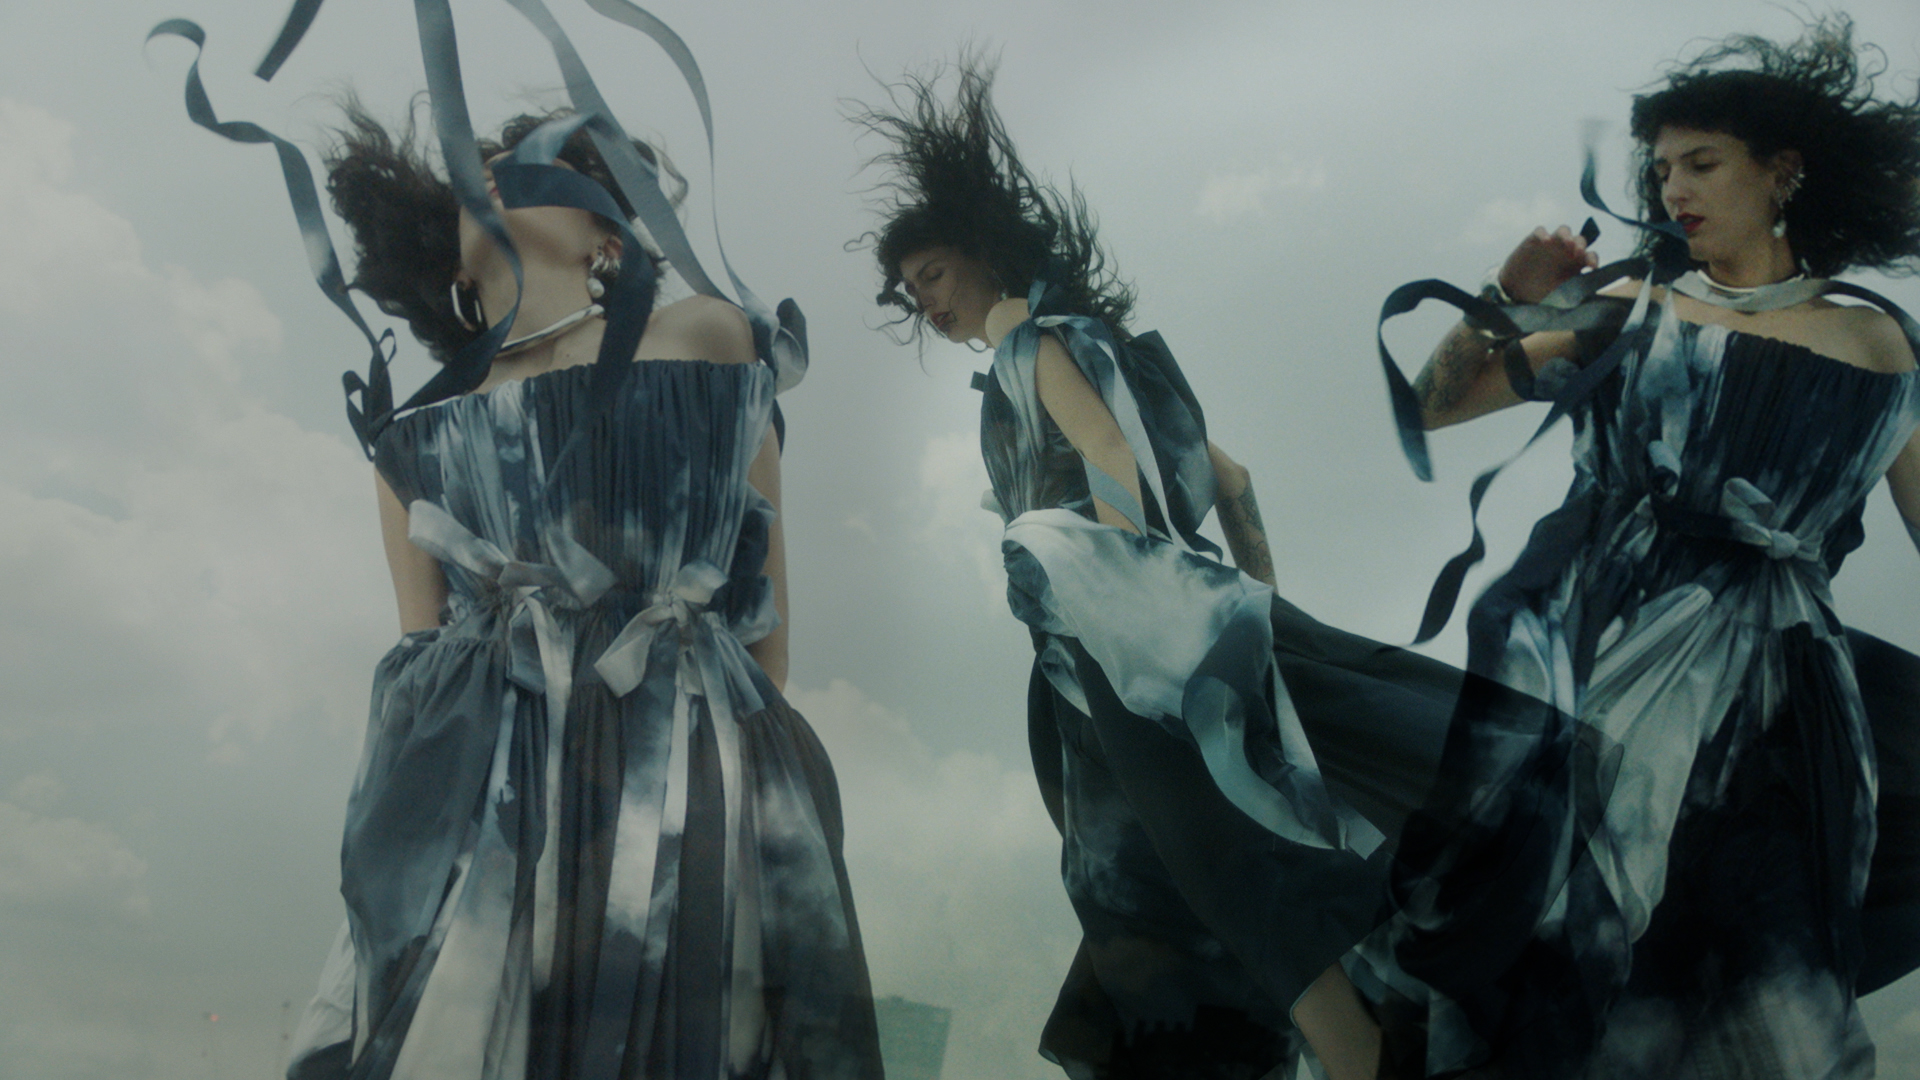 still from alexander mcqueen SS 22 collection film by Sophie Miller